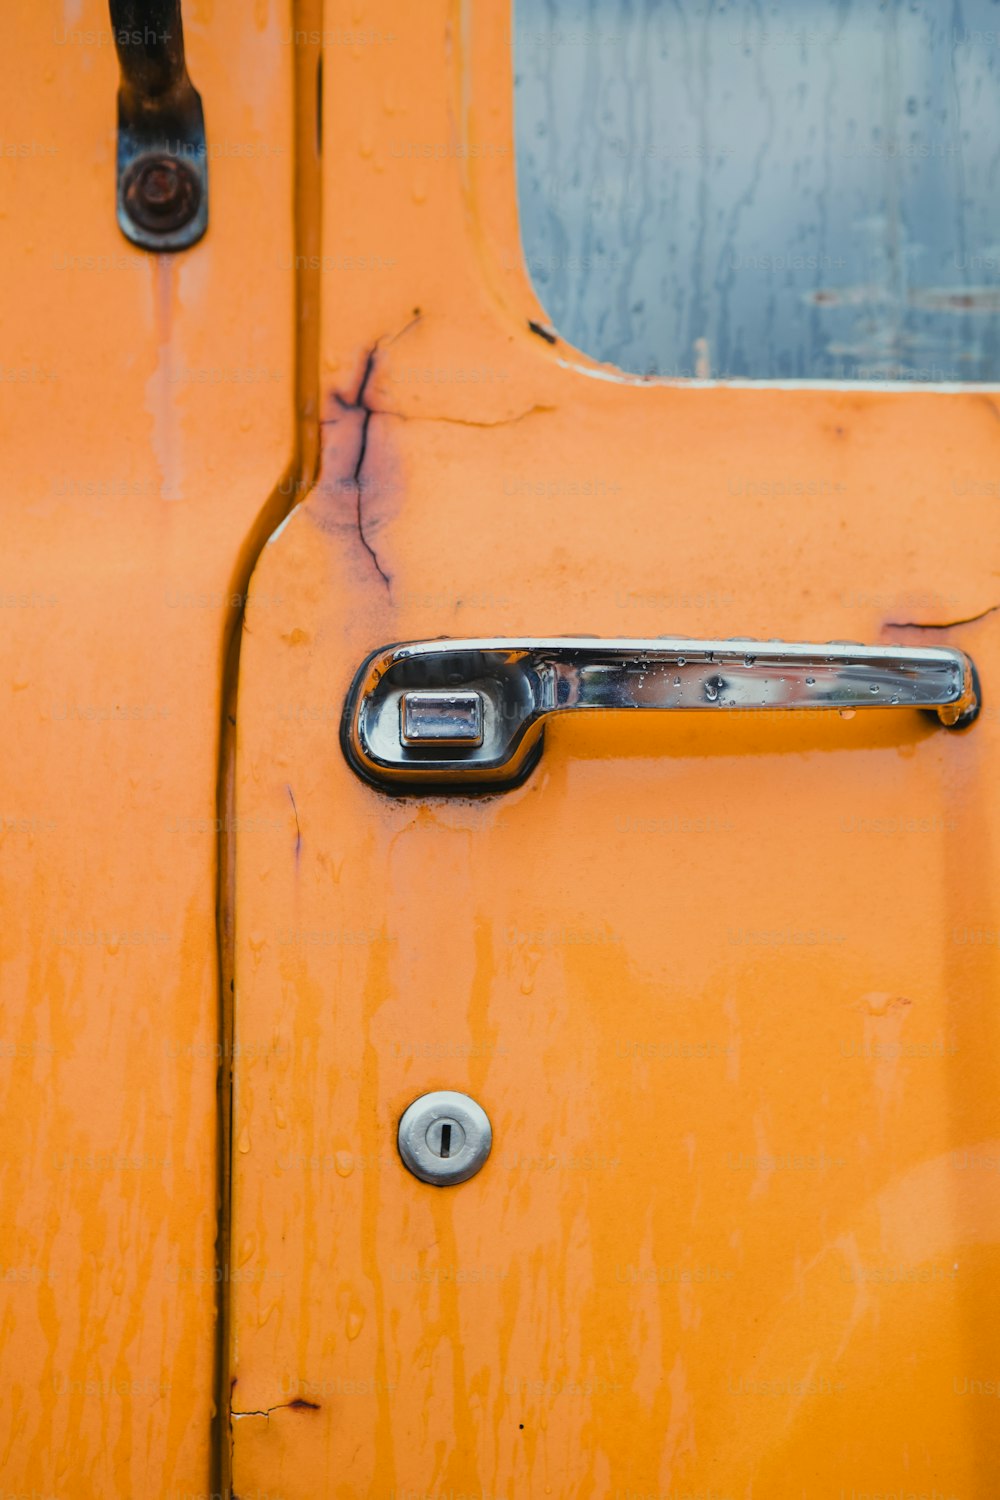 a close up of a door handle on a yellow vehicle